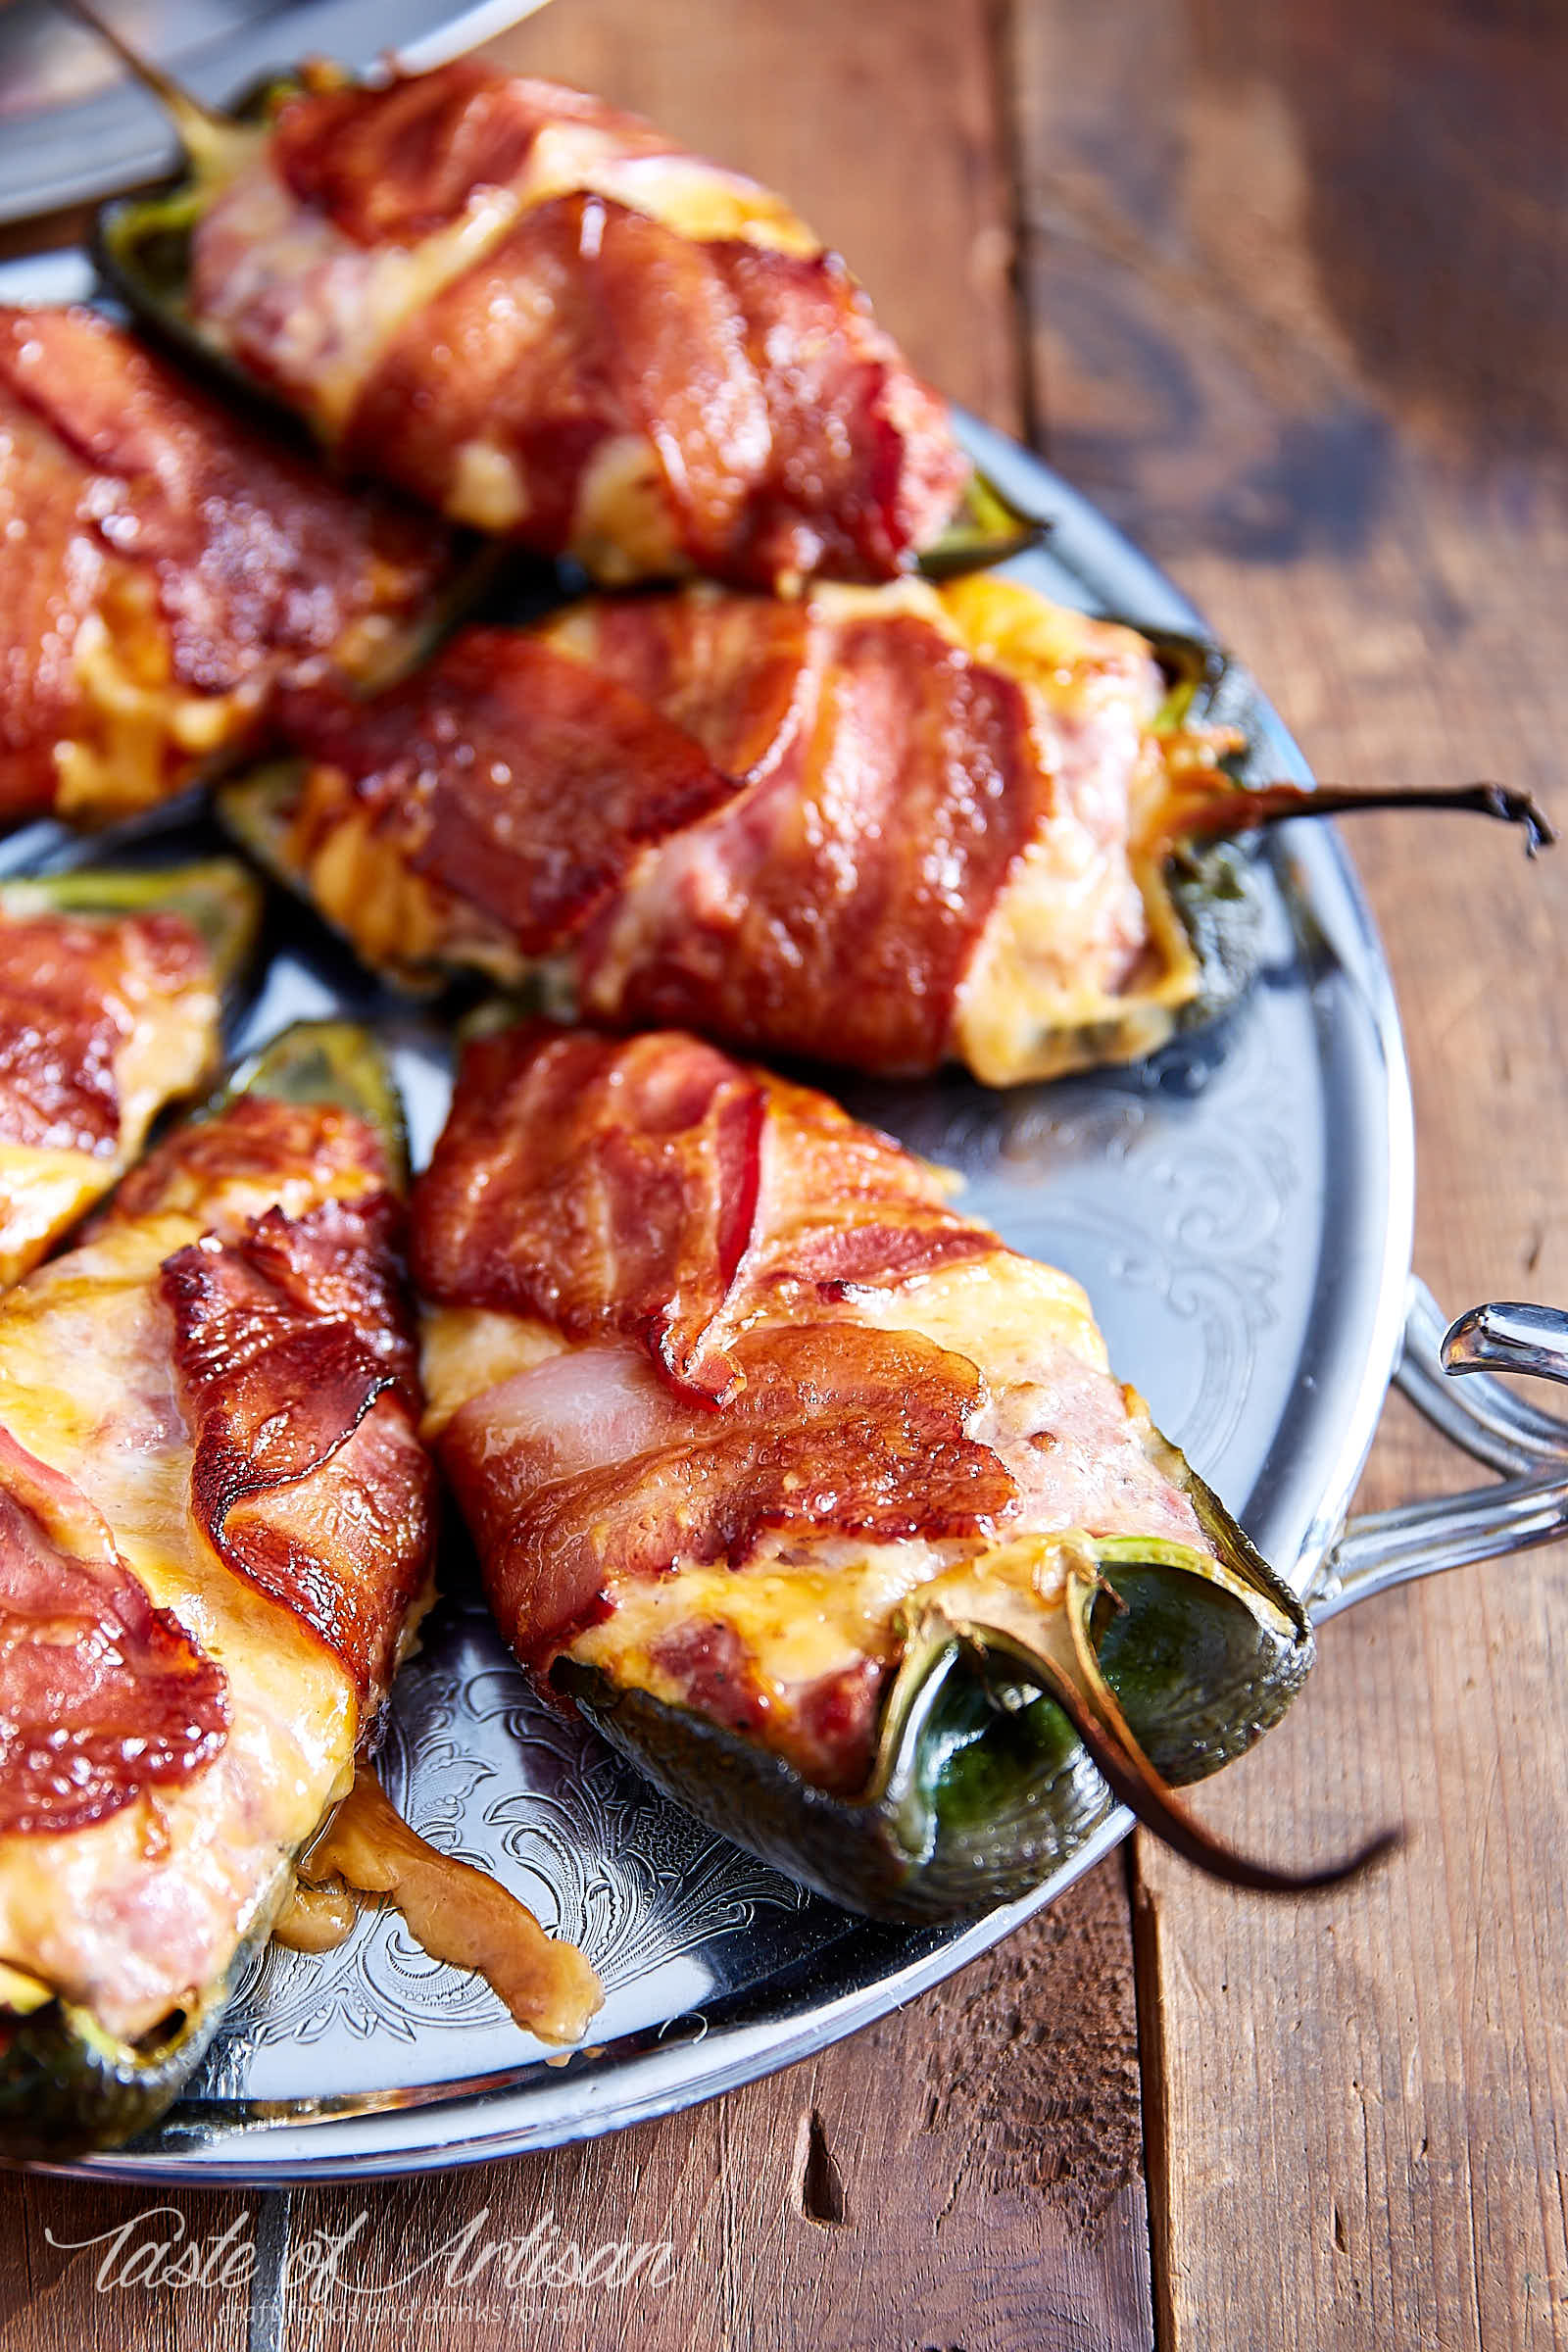 The best smoked stuffed poblano pepper recipe. The peppers are smoky, meaty, cheesy and absolutely delicious. Serve with mashed potatoes. | Taste of Artisan